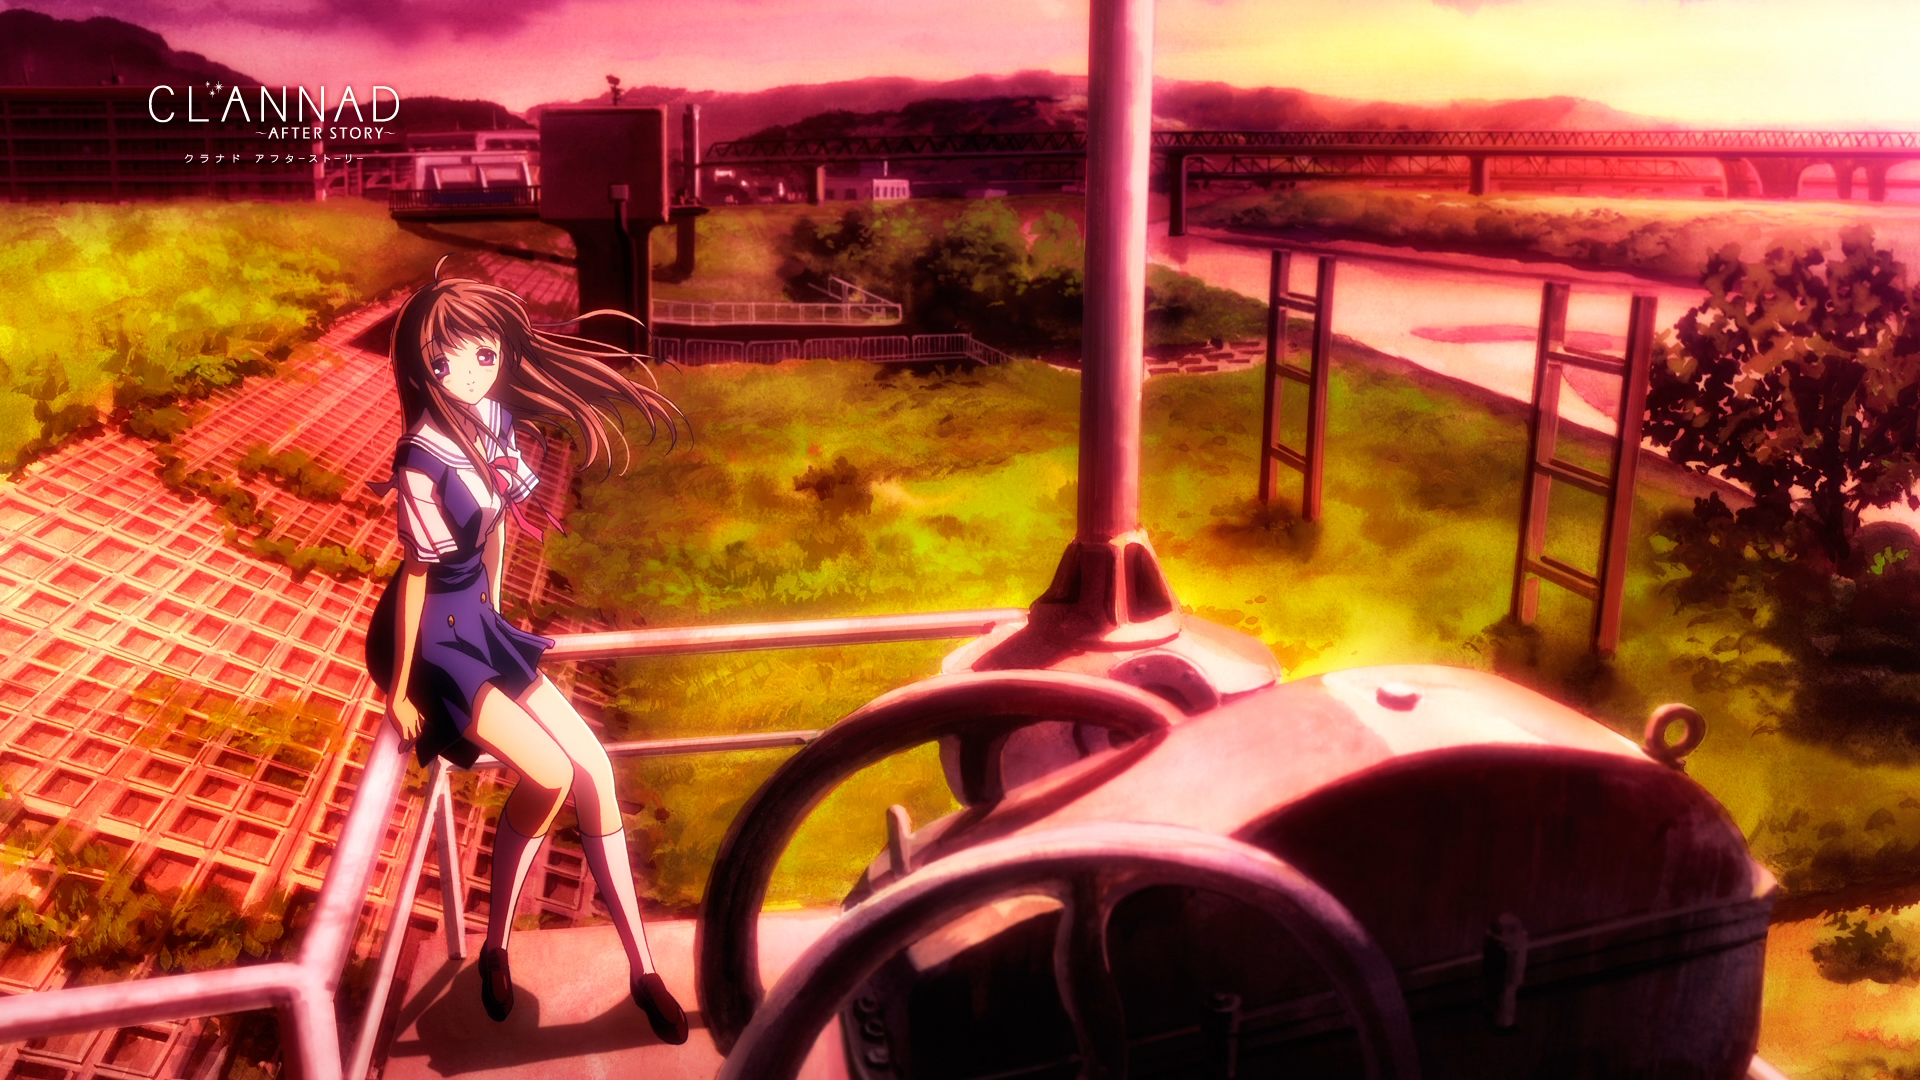 Anime 1920x1080 anime girls anime Clannad windy women outdoors outdoors long hair legs together